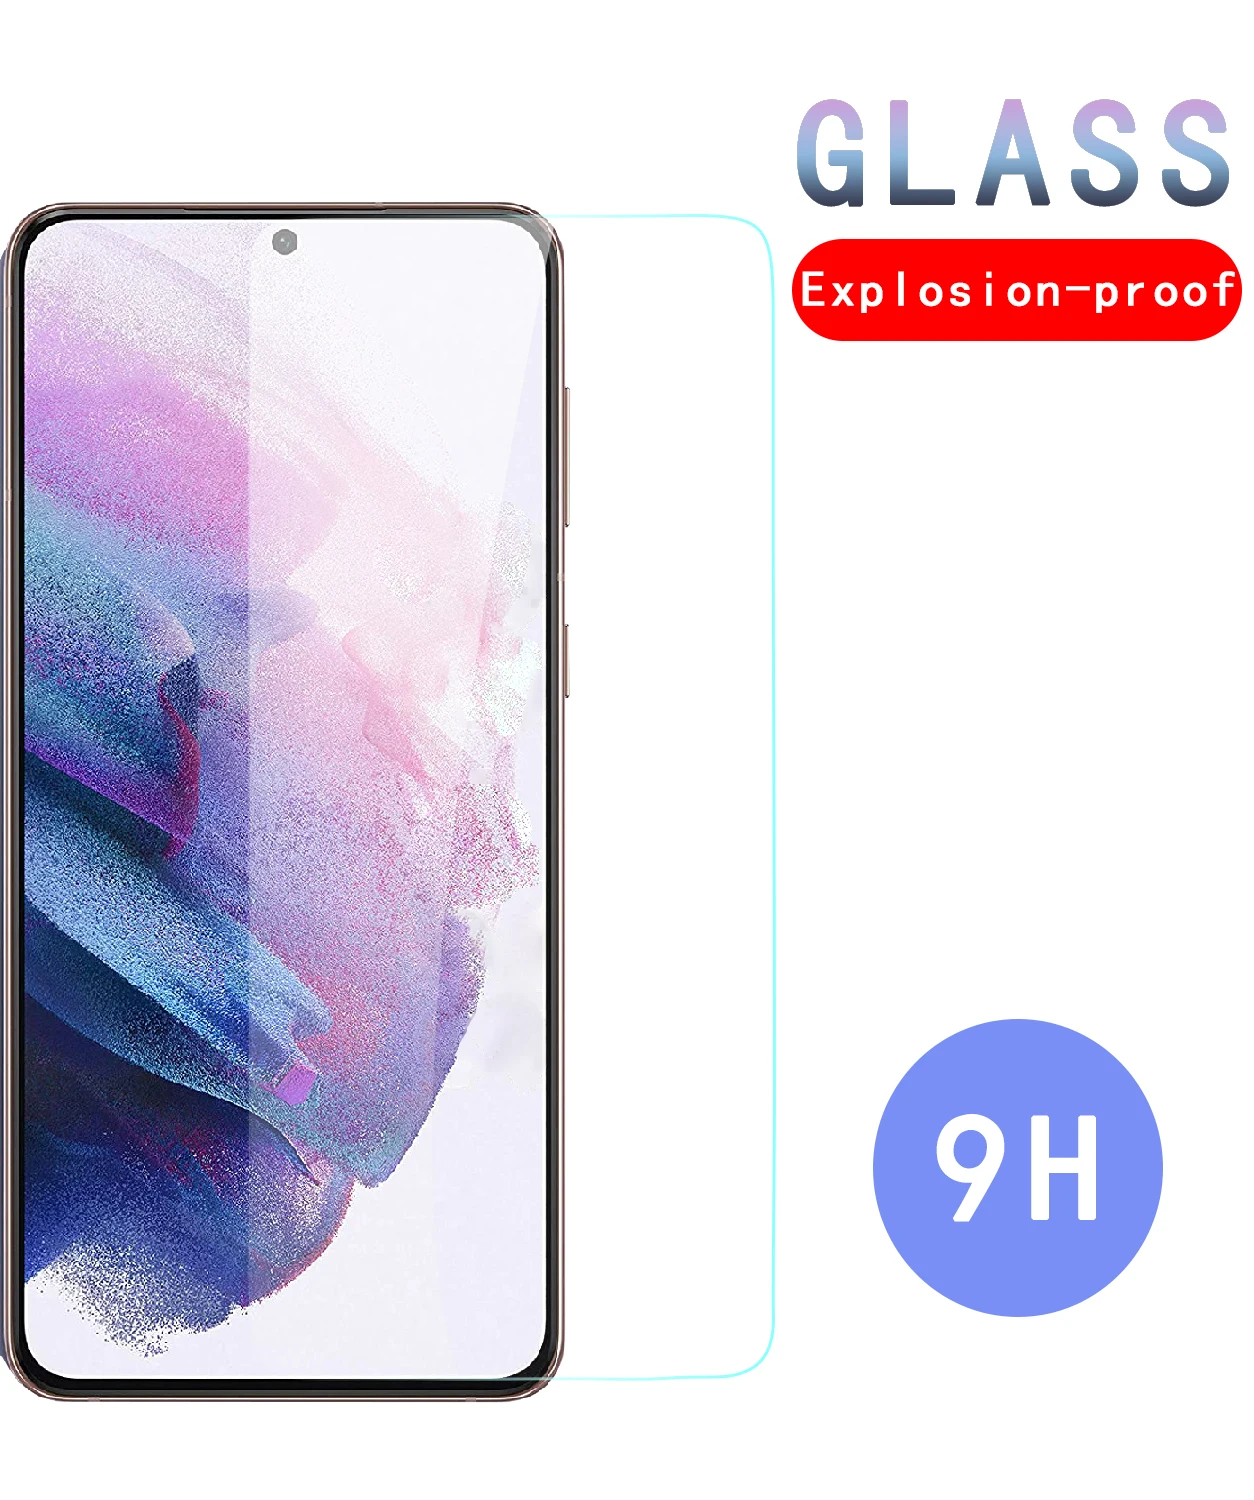 9H Protective Glass For Samsung Galaxy A71 A51 A41 A31 A21S A11 A01 Screen Protector M01 M11 M21 M31 M51 A30 A50 Safety Glass 2pcs tempered glass for samsung a51 a30 s a50 s a71 a21 s galaxy m31 m51 m21 screen protectors on galaxy m11 a70 a10 a11 glass